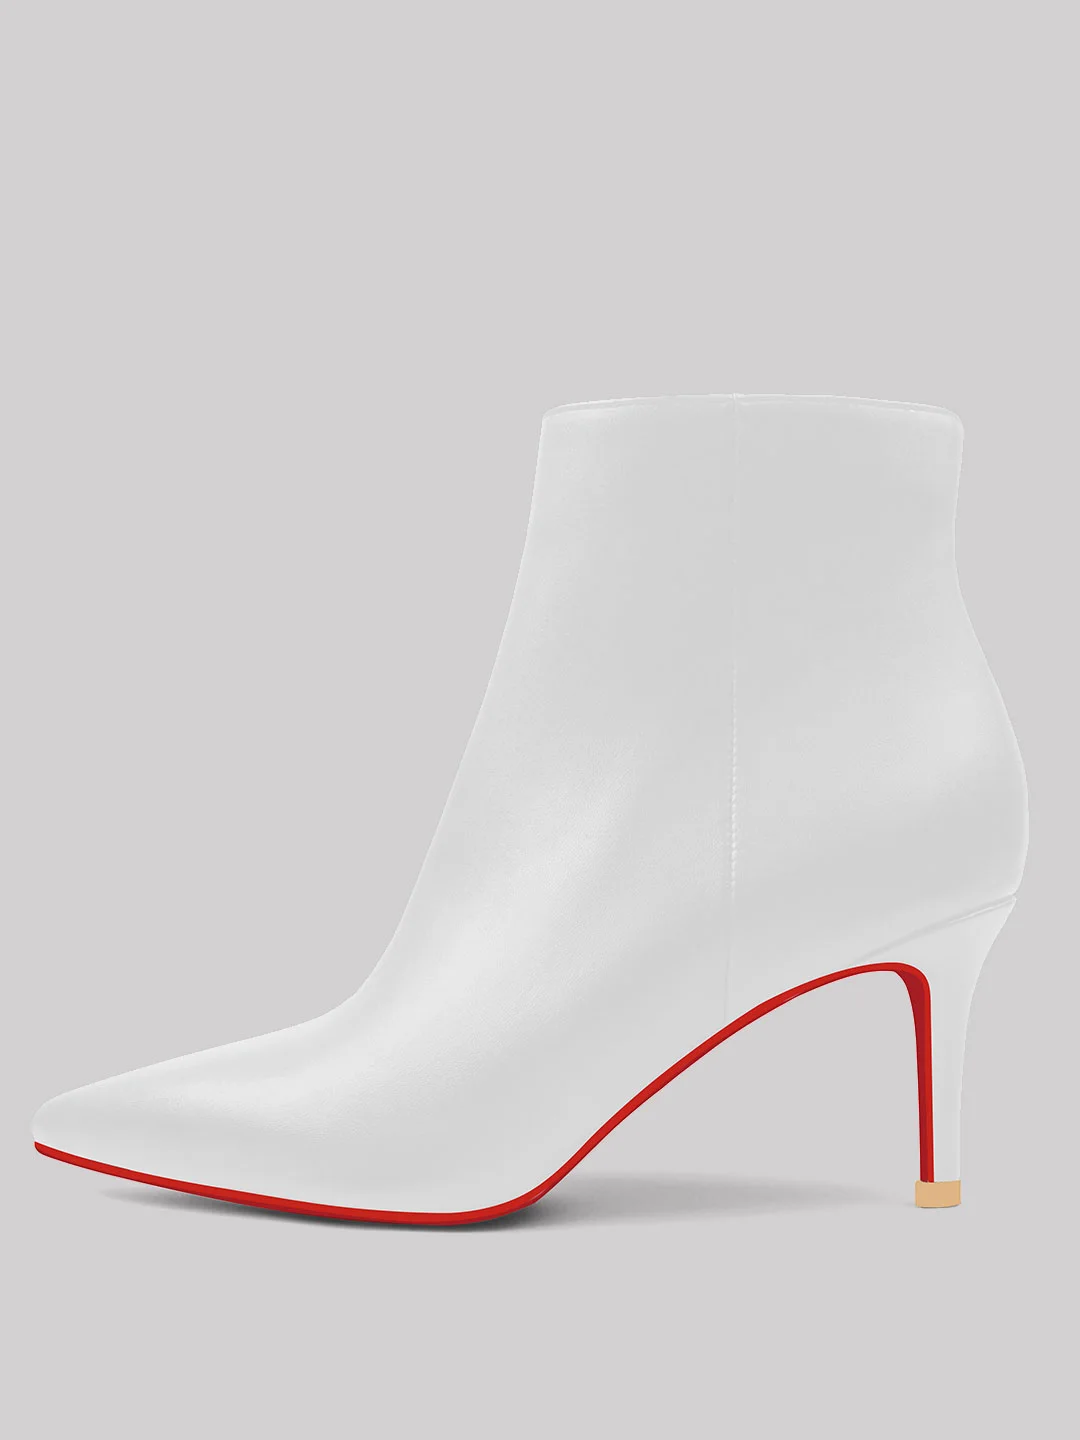 2.3" Women's Ankle Boots Closed Pointed Toe Red Bottoms Stilettos Booties